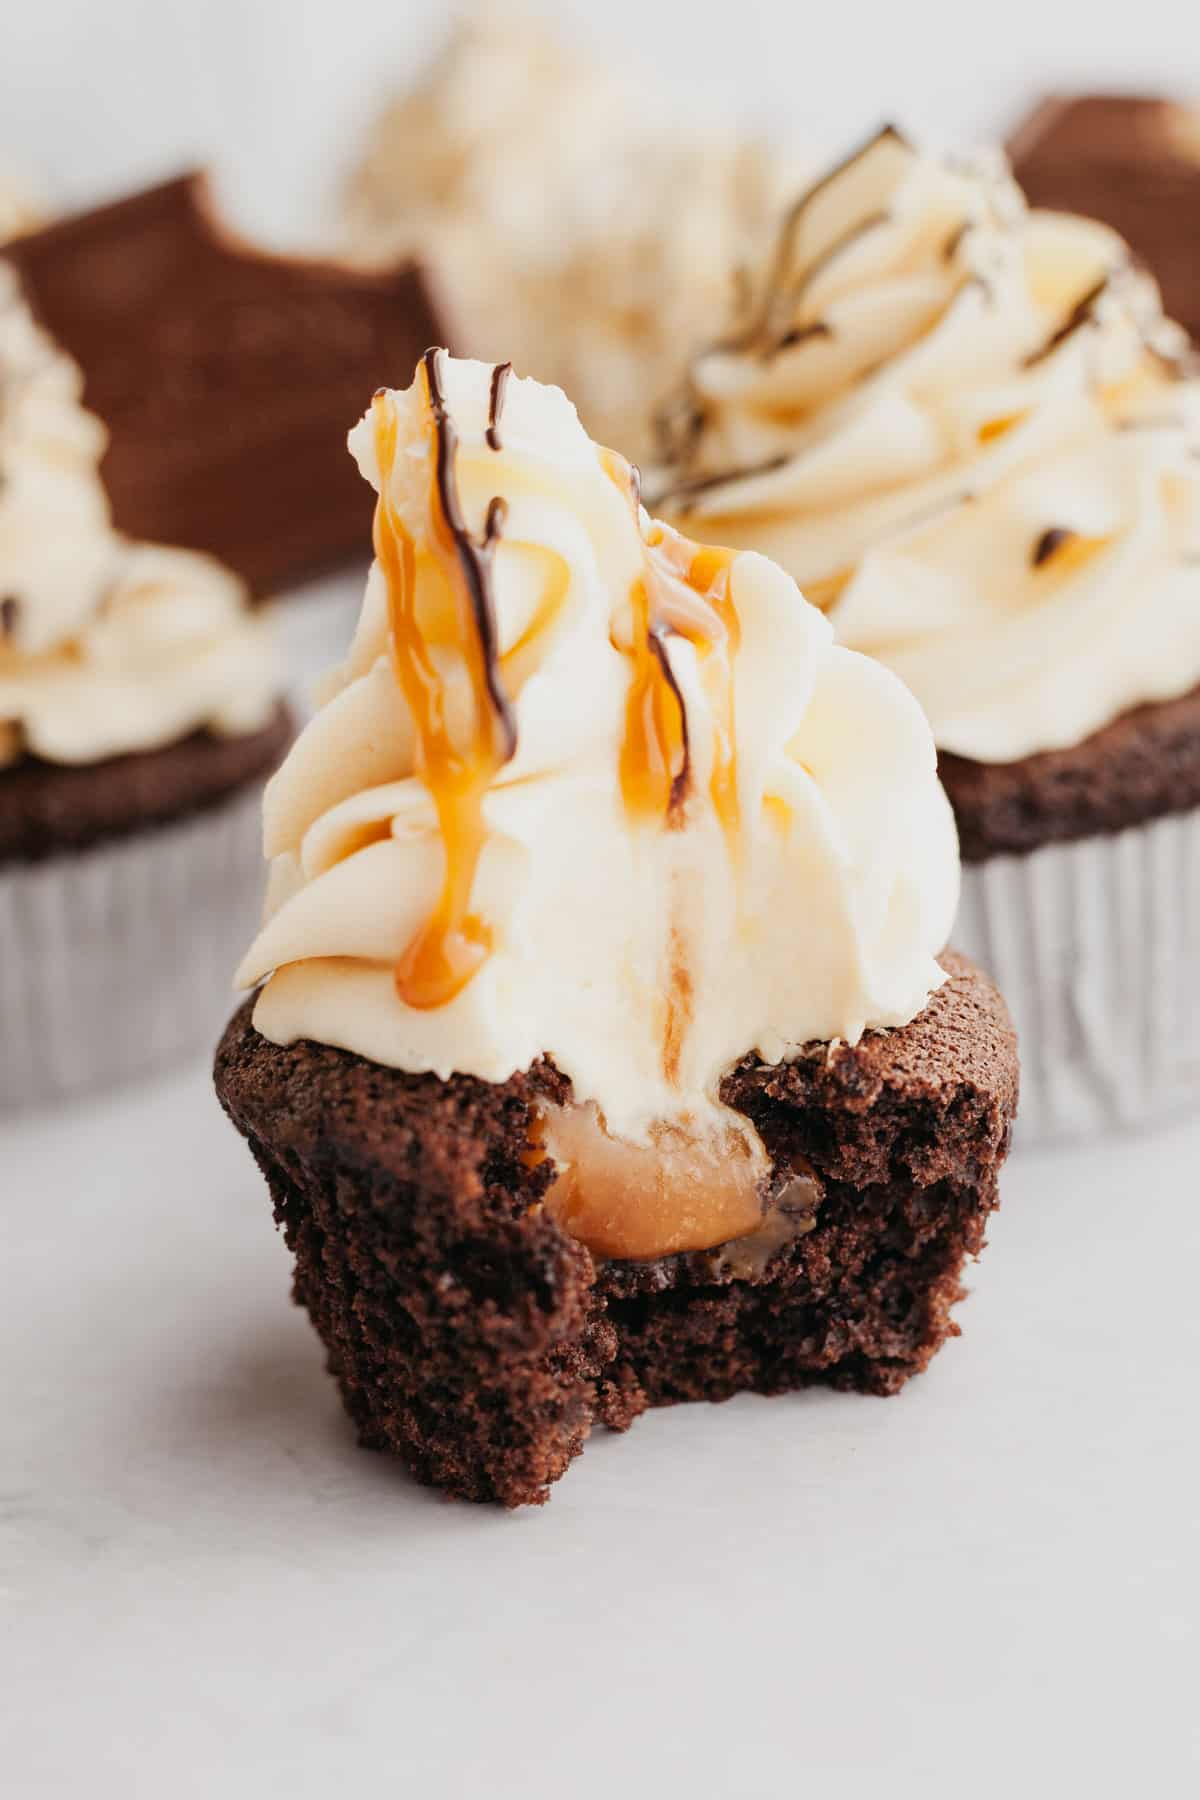 A chocolate cupcake with a caramel filling.